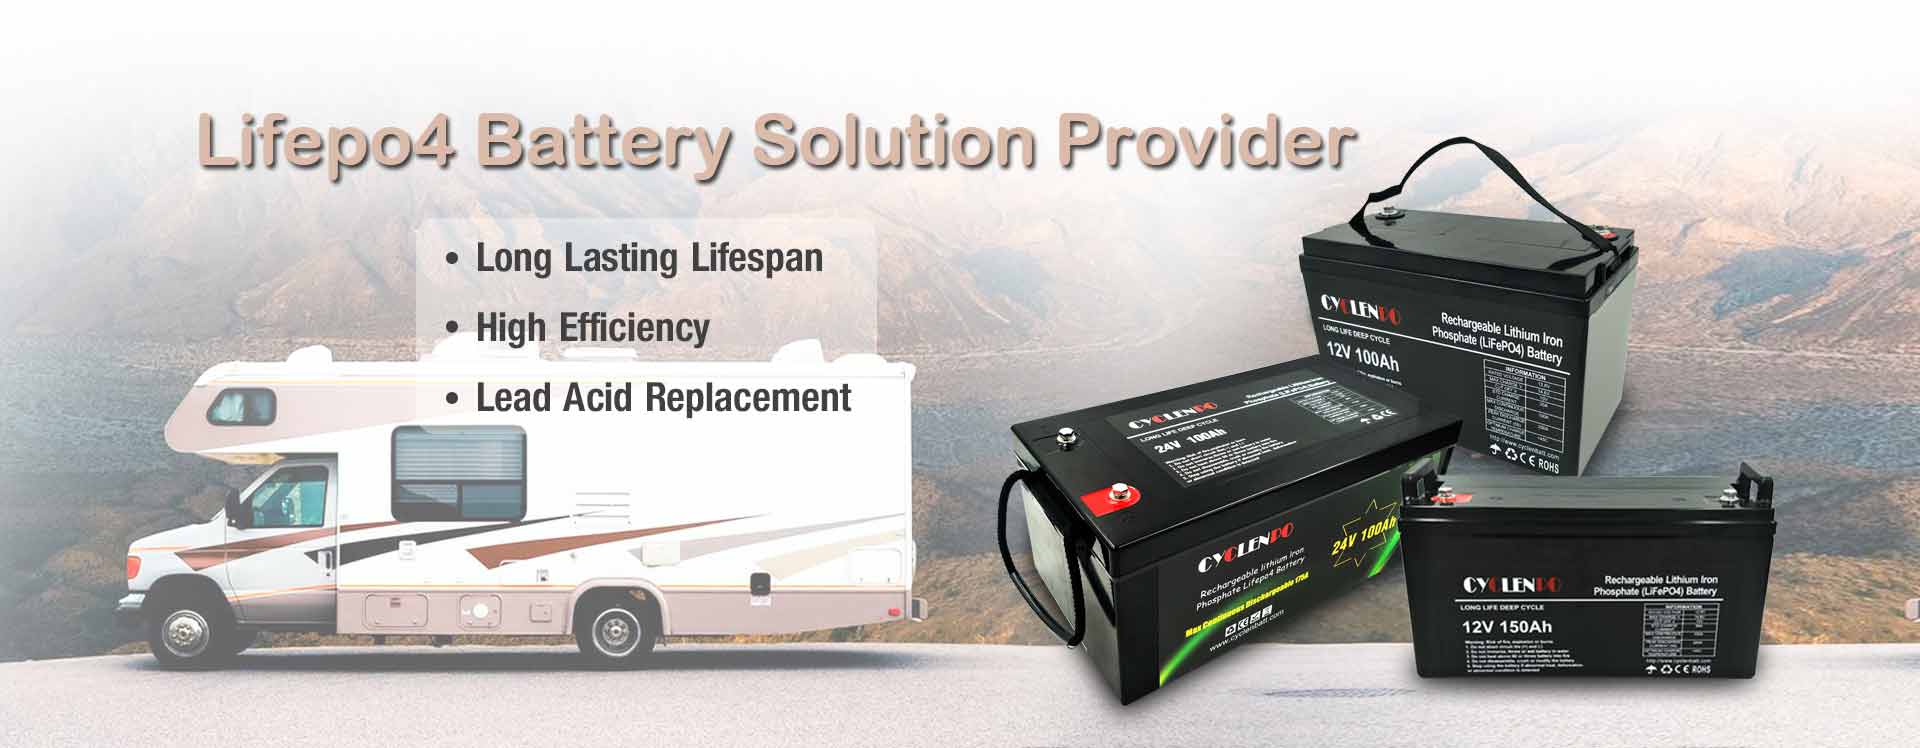 lifepo4 battery manufacturer